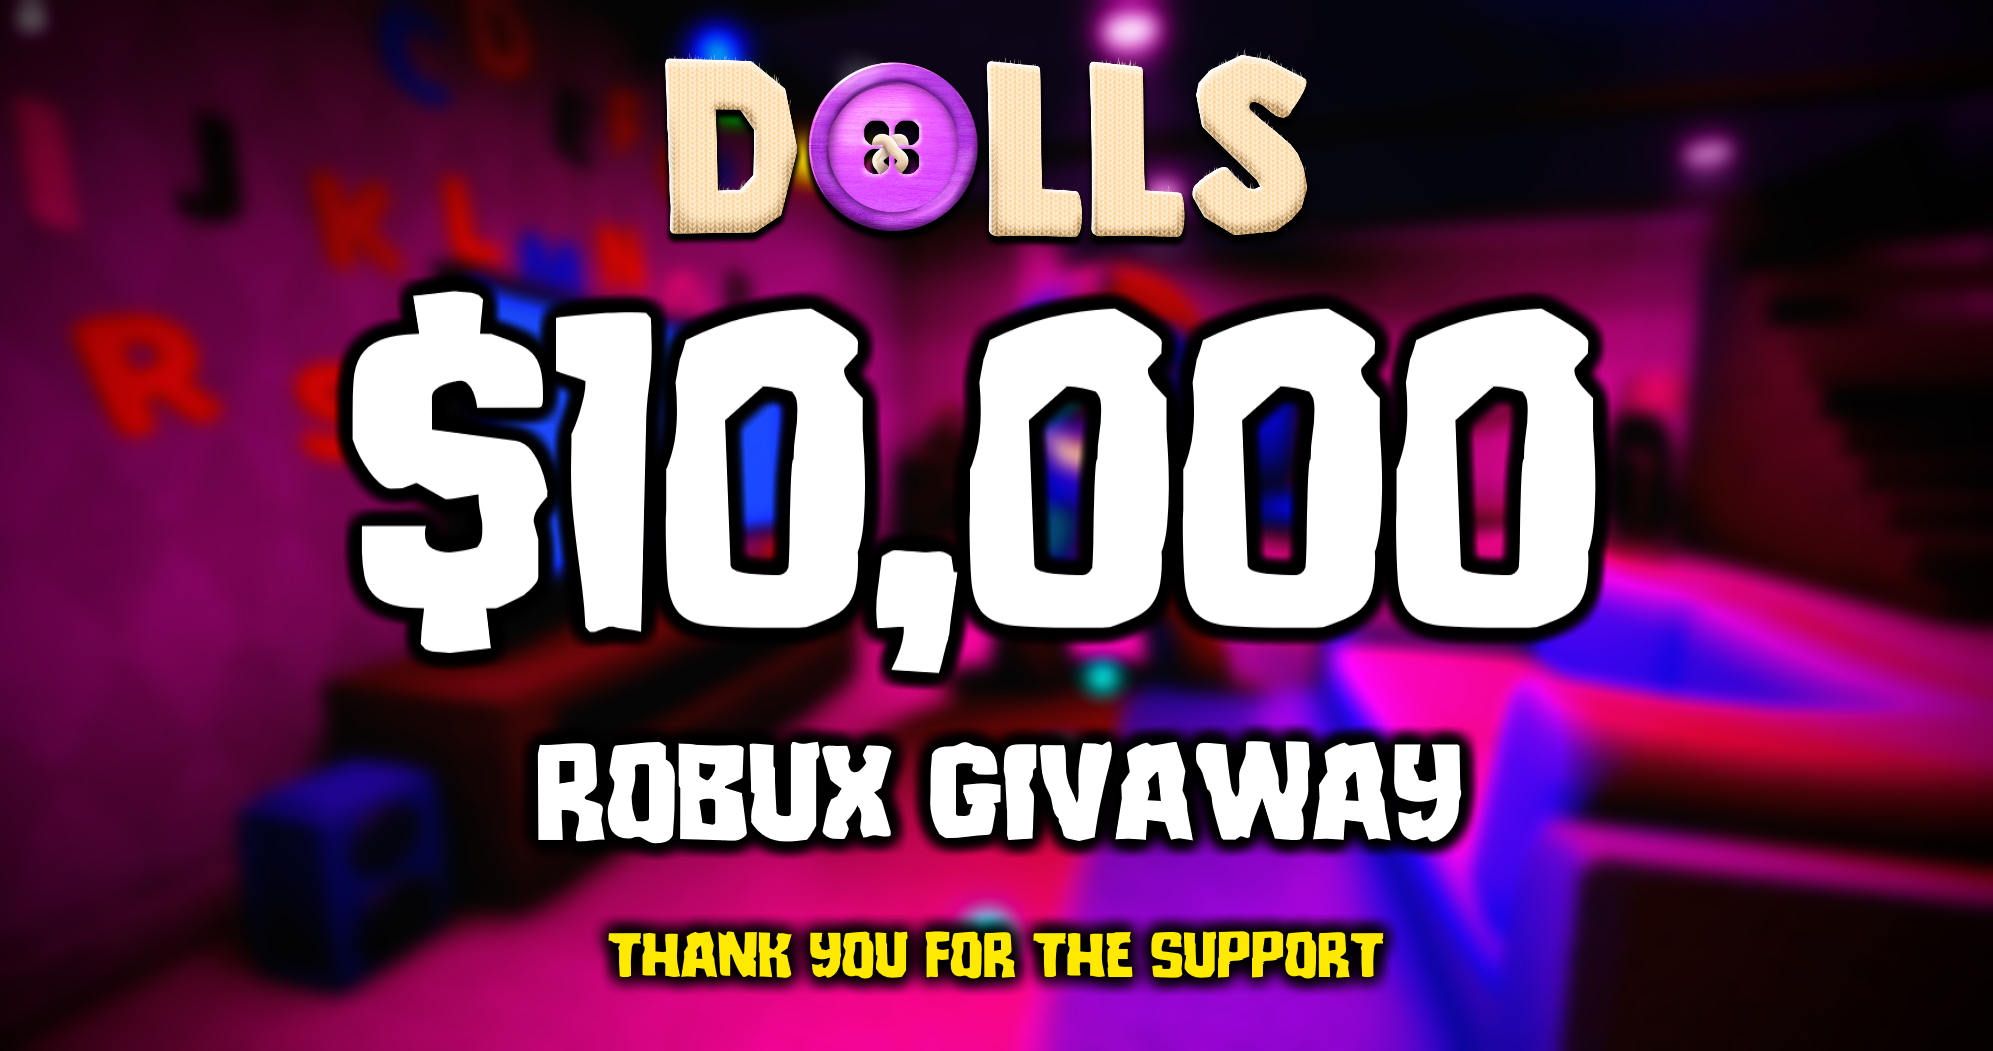 Thank you Roblox Support 